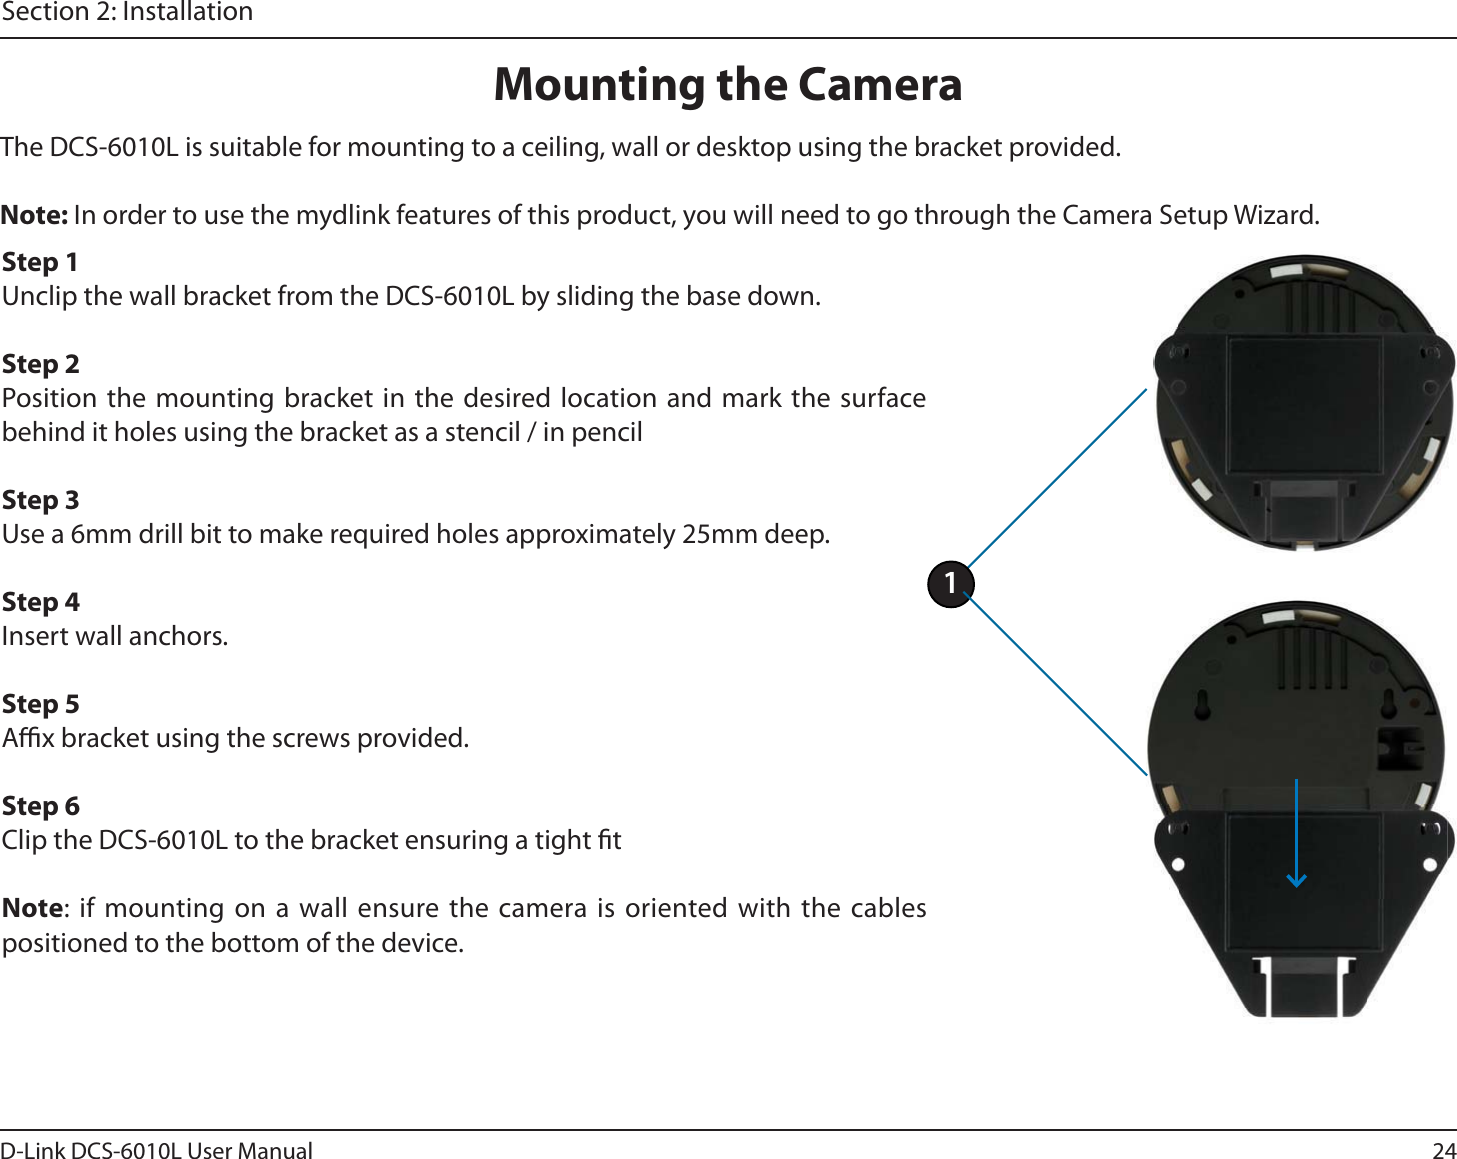 24D-Link DCS-6010L User ManualSection 2: InstallationMounting the CameraThe DCS-6010L is suitable for mounting to a ceiling, wall or desktop using the bracket provided. Note: In order to use the mydlink features of this product, you will need to go through the Camera Setup Wizard.Step 1Unclip the wall bracket from the DCS-6010L by sliding the base down.Step 2Position the mounting bracket in the desired location and mark the surface behind it holes using the bracket as a stencil / in pencilStep 3 Use a 6mm drill bit to make required holes approximately 25mm deep.Step 4Insert wall anchors.Step 5Ax bracket using the screws provided.Step 6Clip the DCS-6010L to the bracket ensuring a tight tNote: if mounting on a wall ensure the camera is oriented with the cables positioned to the bottom of the device.1